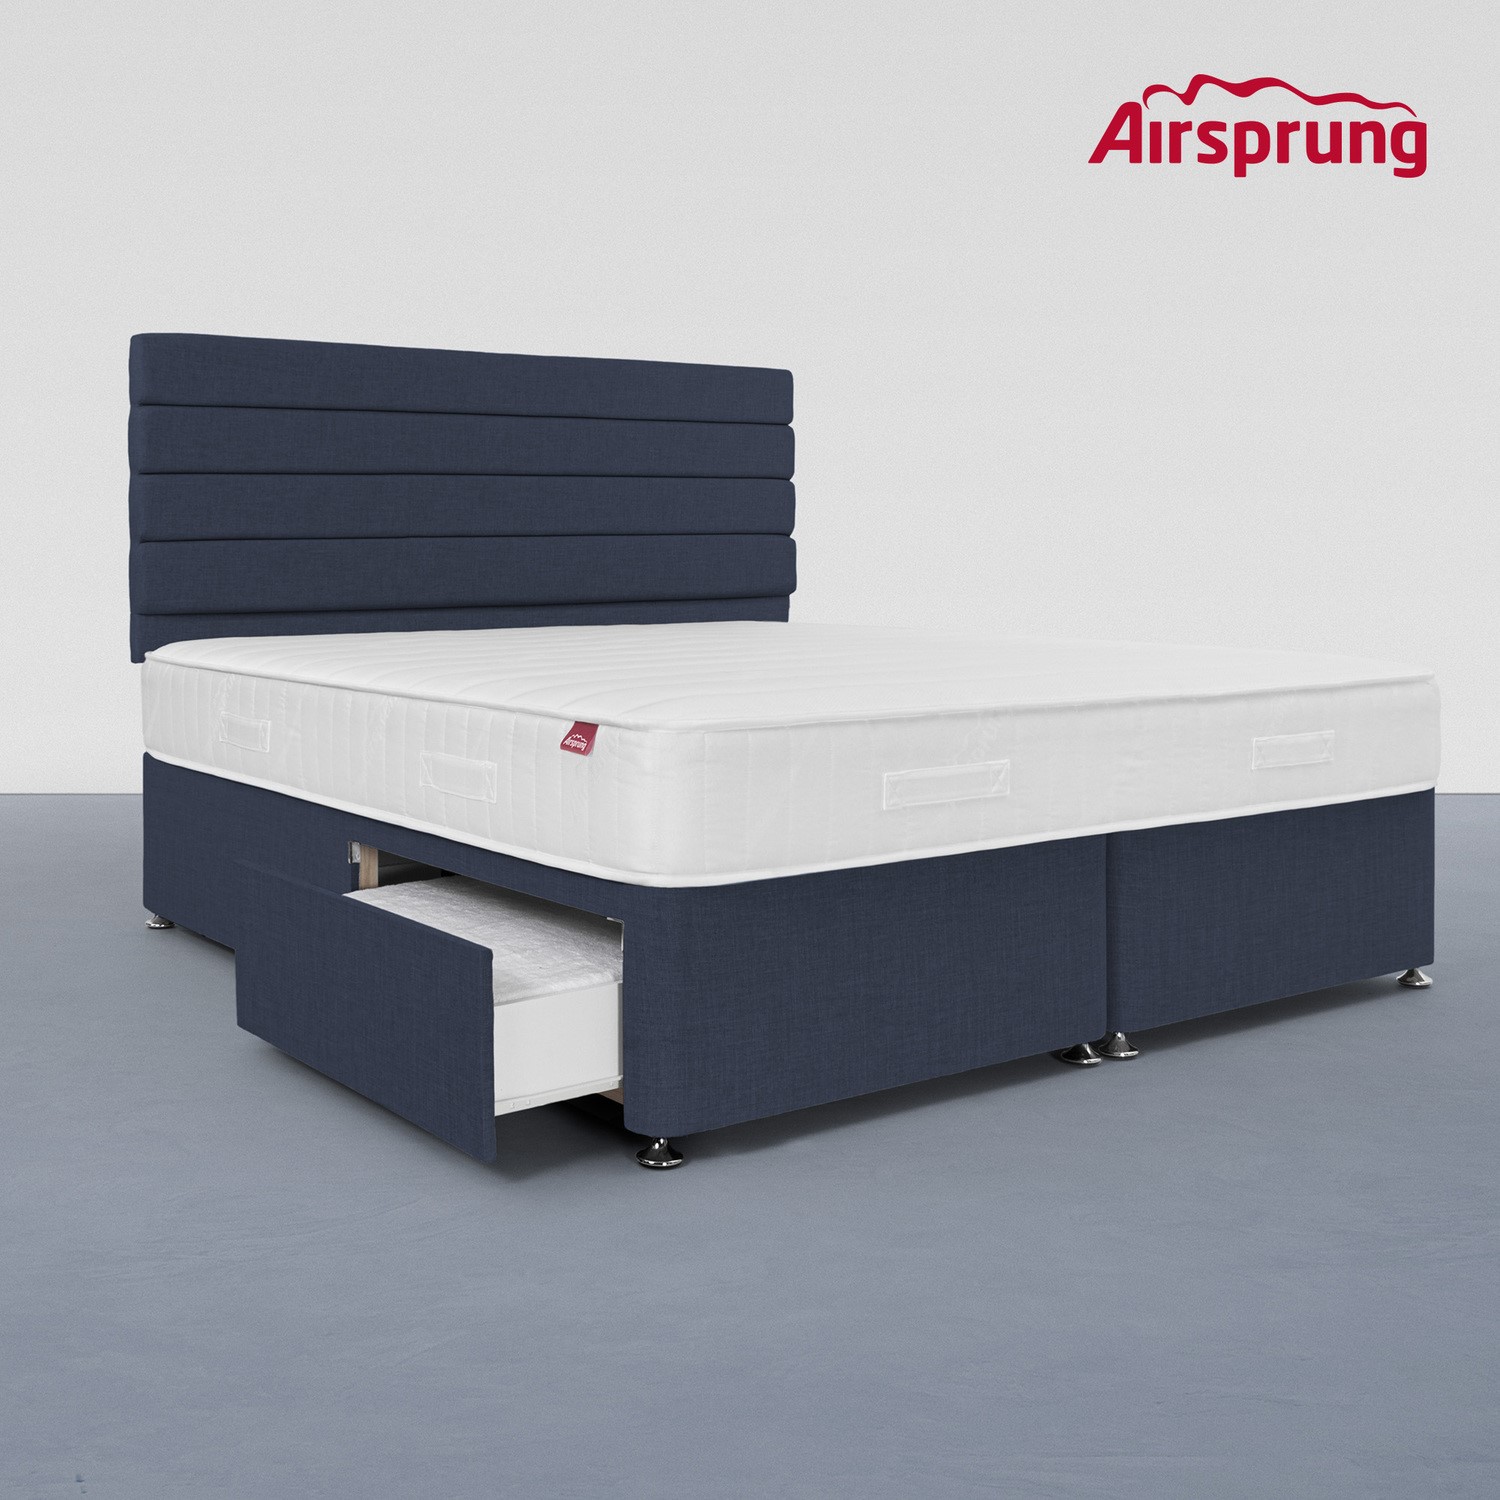 Read more about Airsprung super king 2 drawer divan bed with hybrid mattress midnight blue